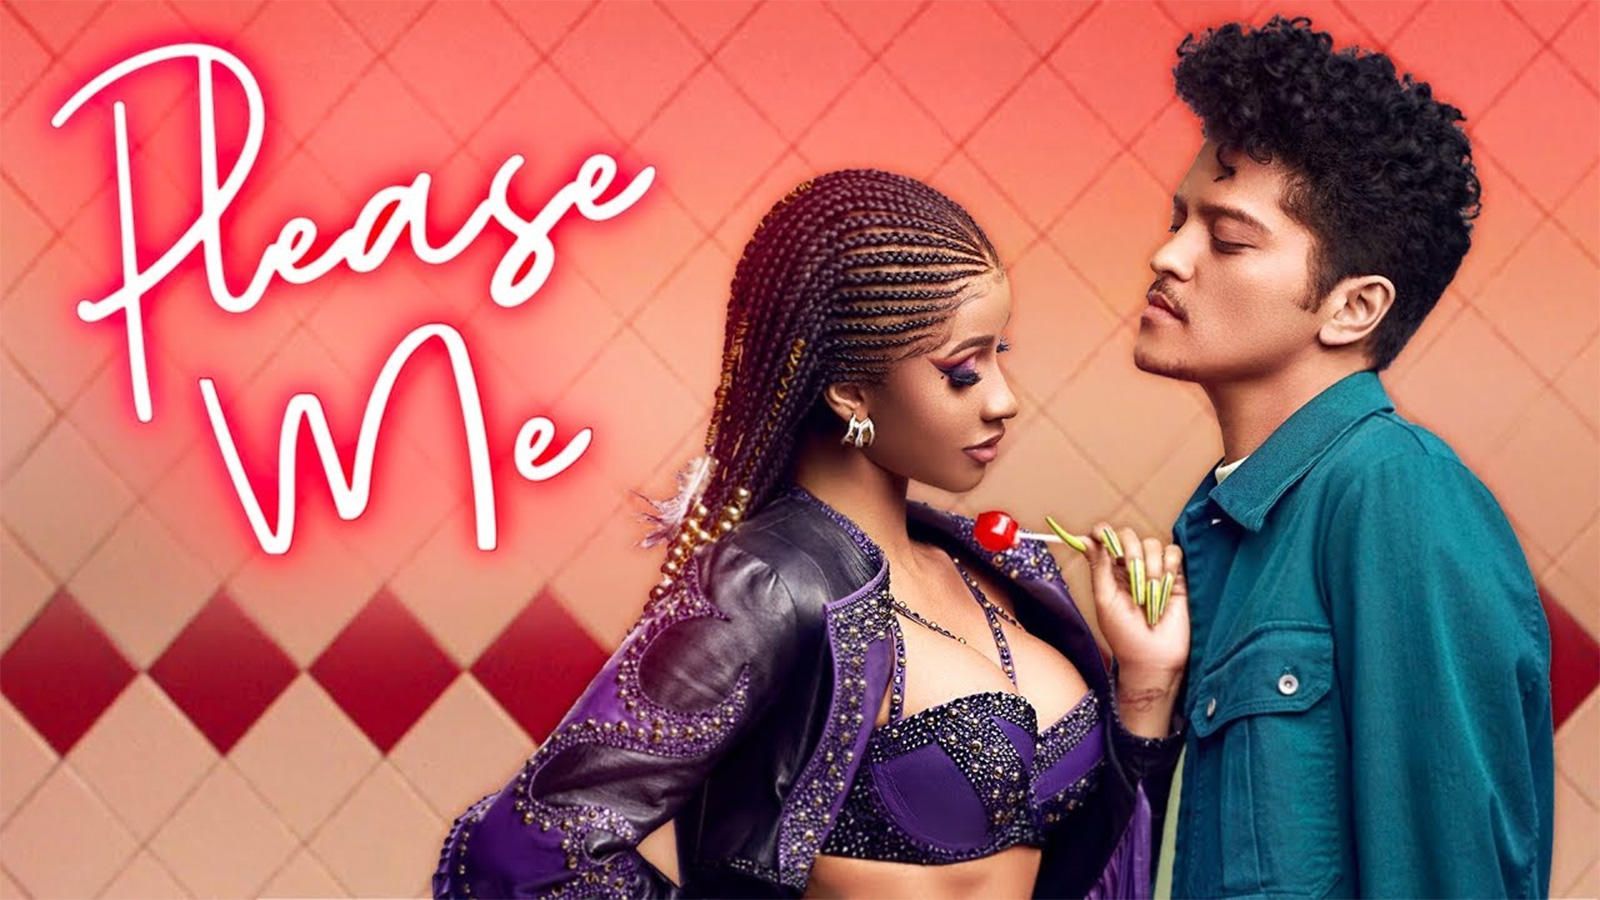 Latest English Song Please Me Sung By Cardi B and Bruno Mars. English Video Songs of India